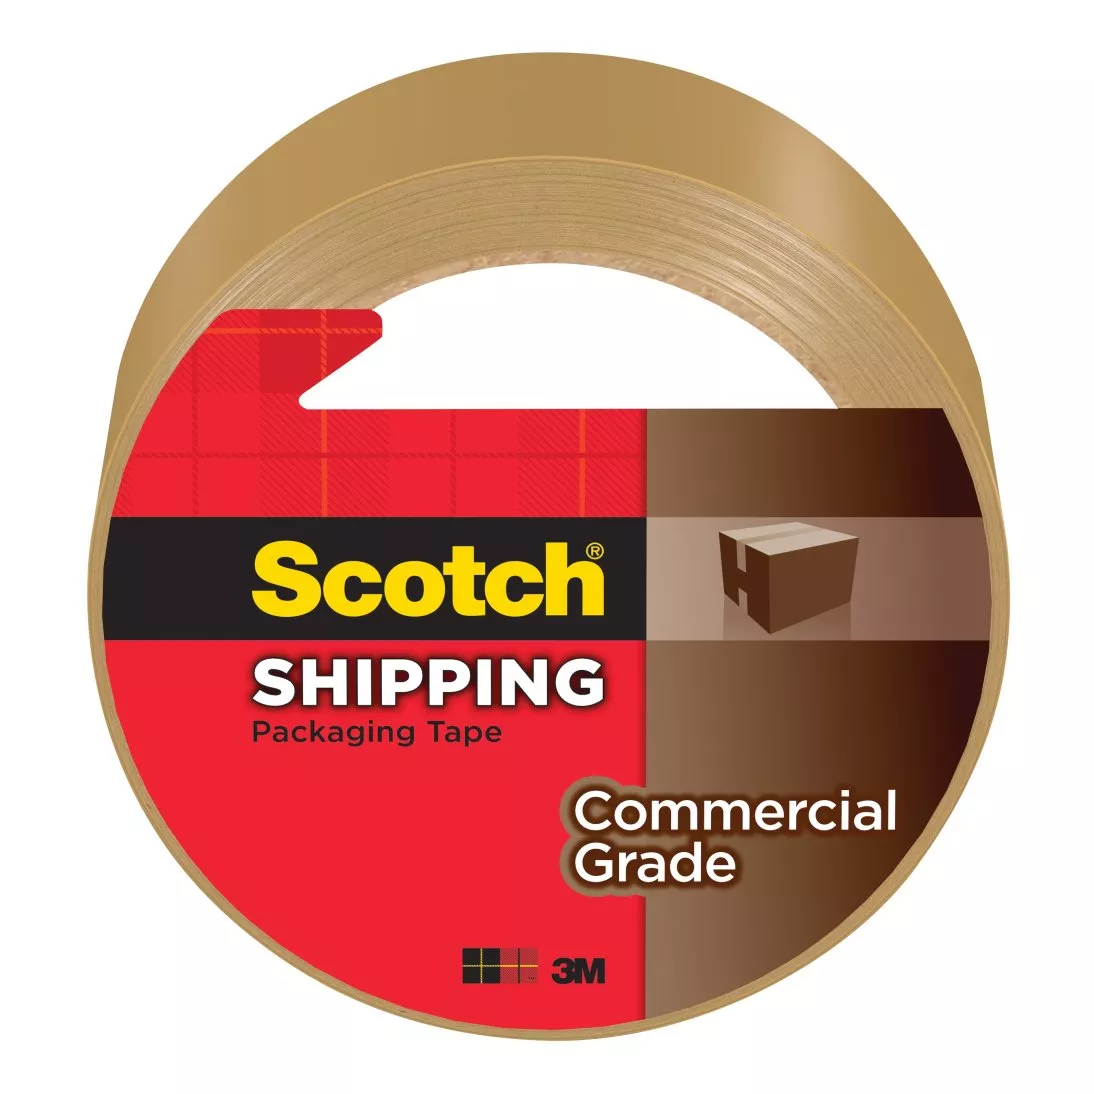 Scotch® Commercial Grade Shipping Packaging Tape 3750T-6, 1.88 in x 54.6
yd (48 mm x 50 m) 6 Pack Tan